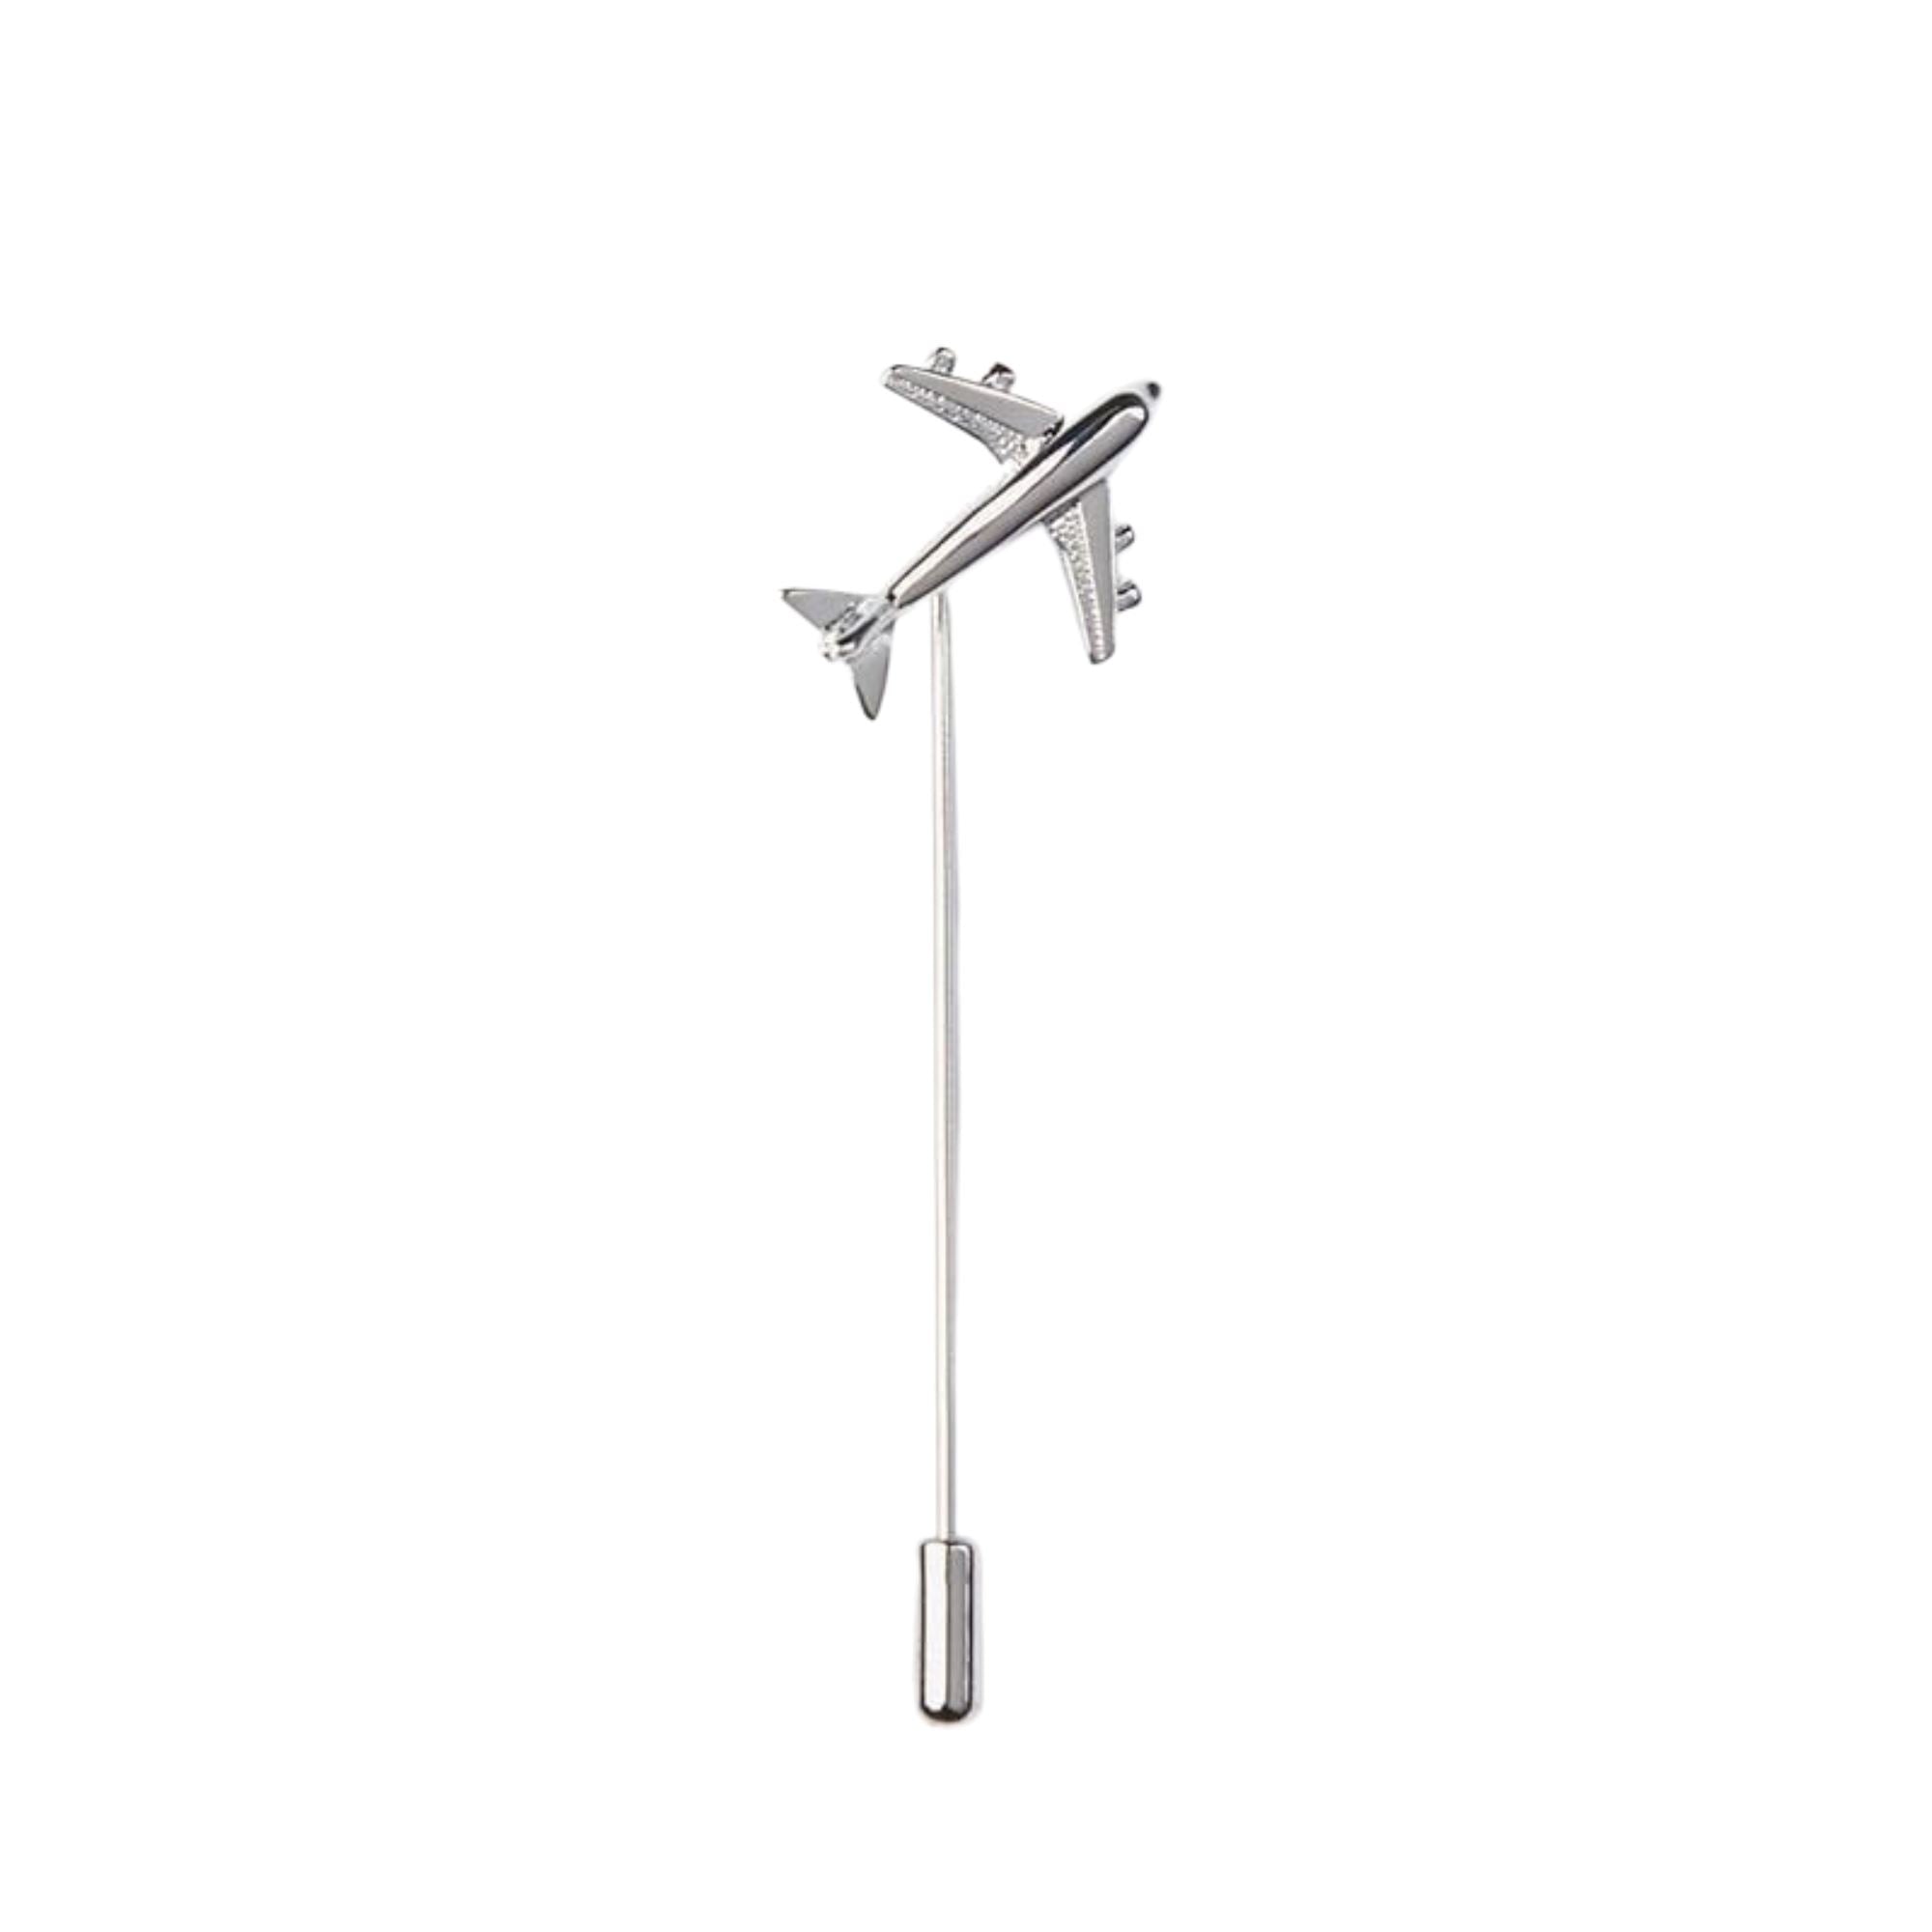 Airplane Lapel Stick Pin in Silver Lapel Pin Clinks 